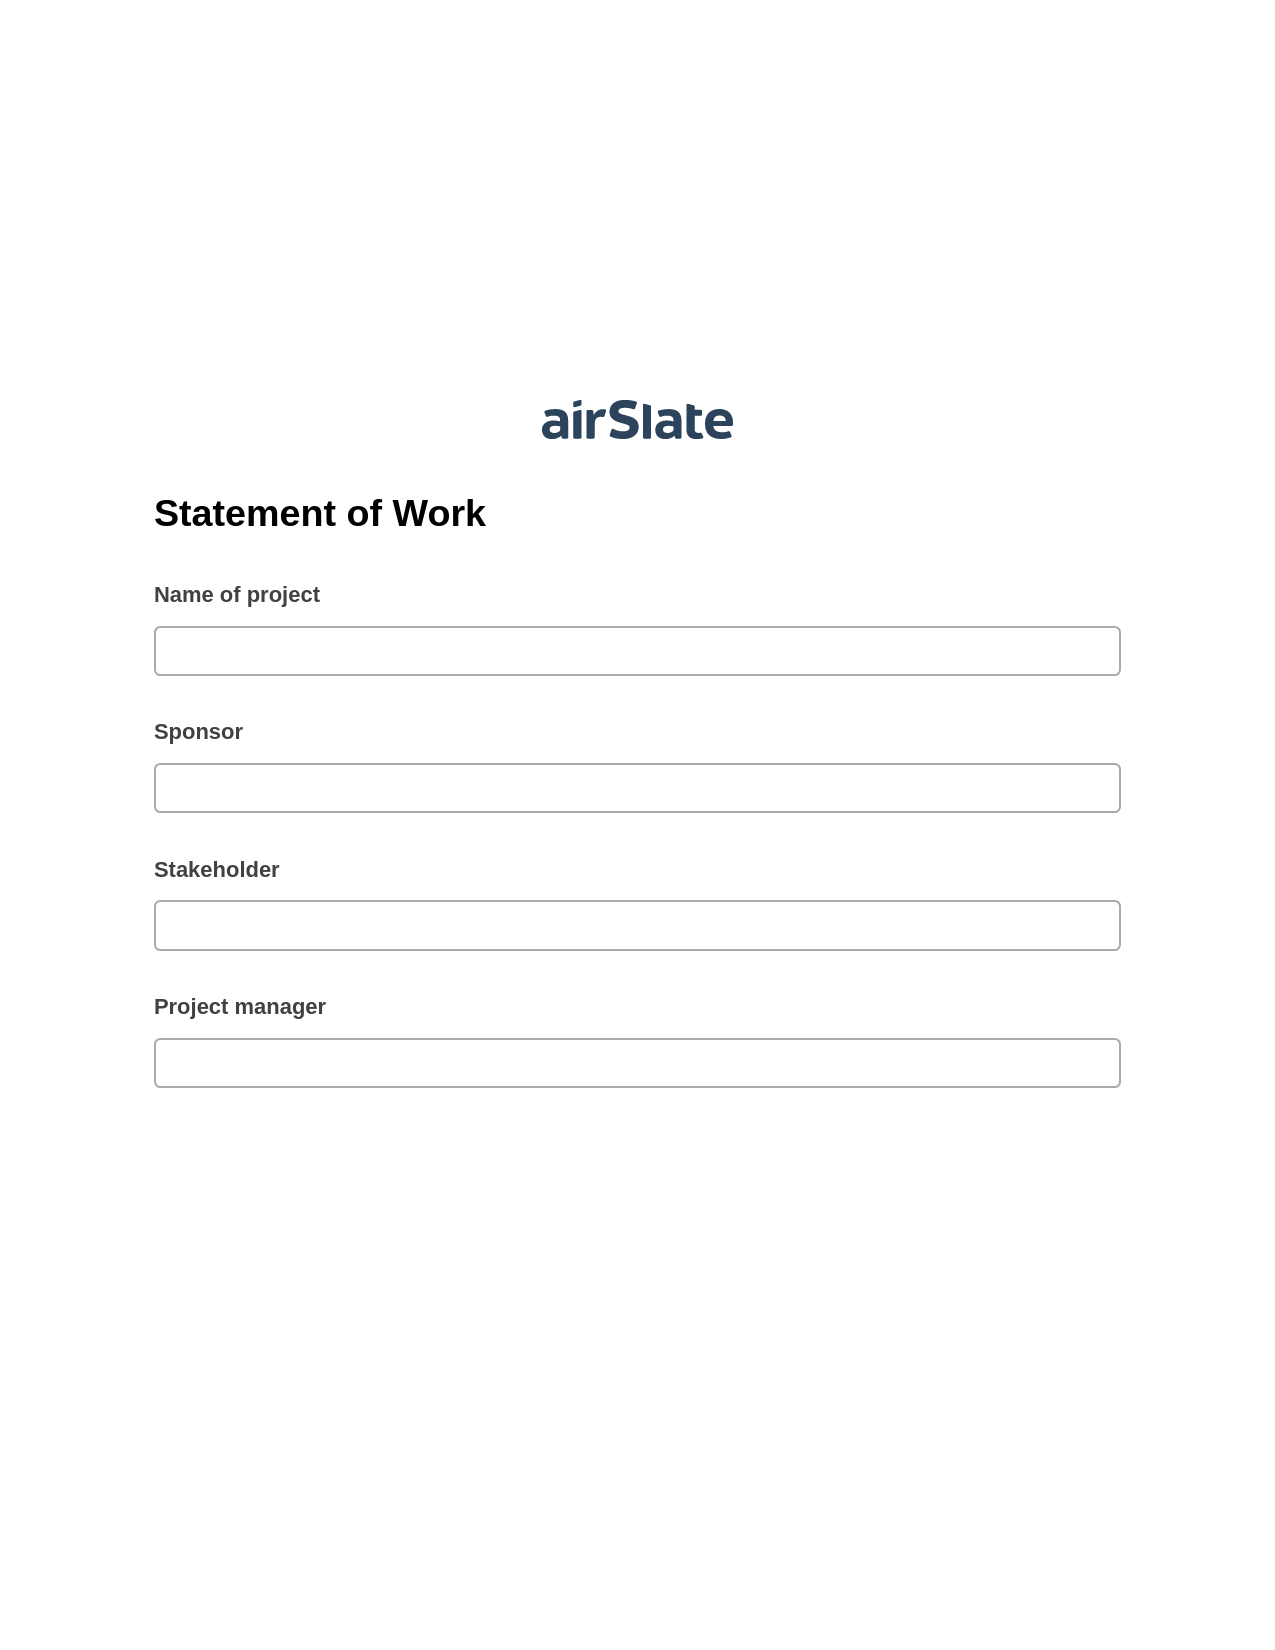 Statement of Work Pre-fill Dropdown from Airtable, System Bot - Create a Slate in another Flow, OneDrive Bot